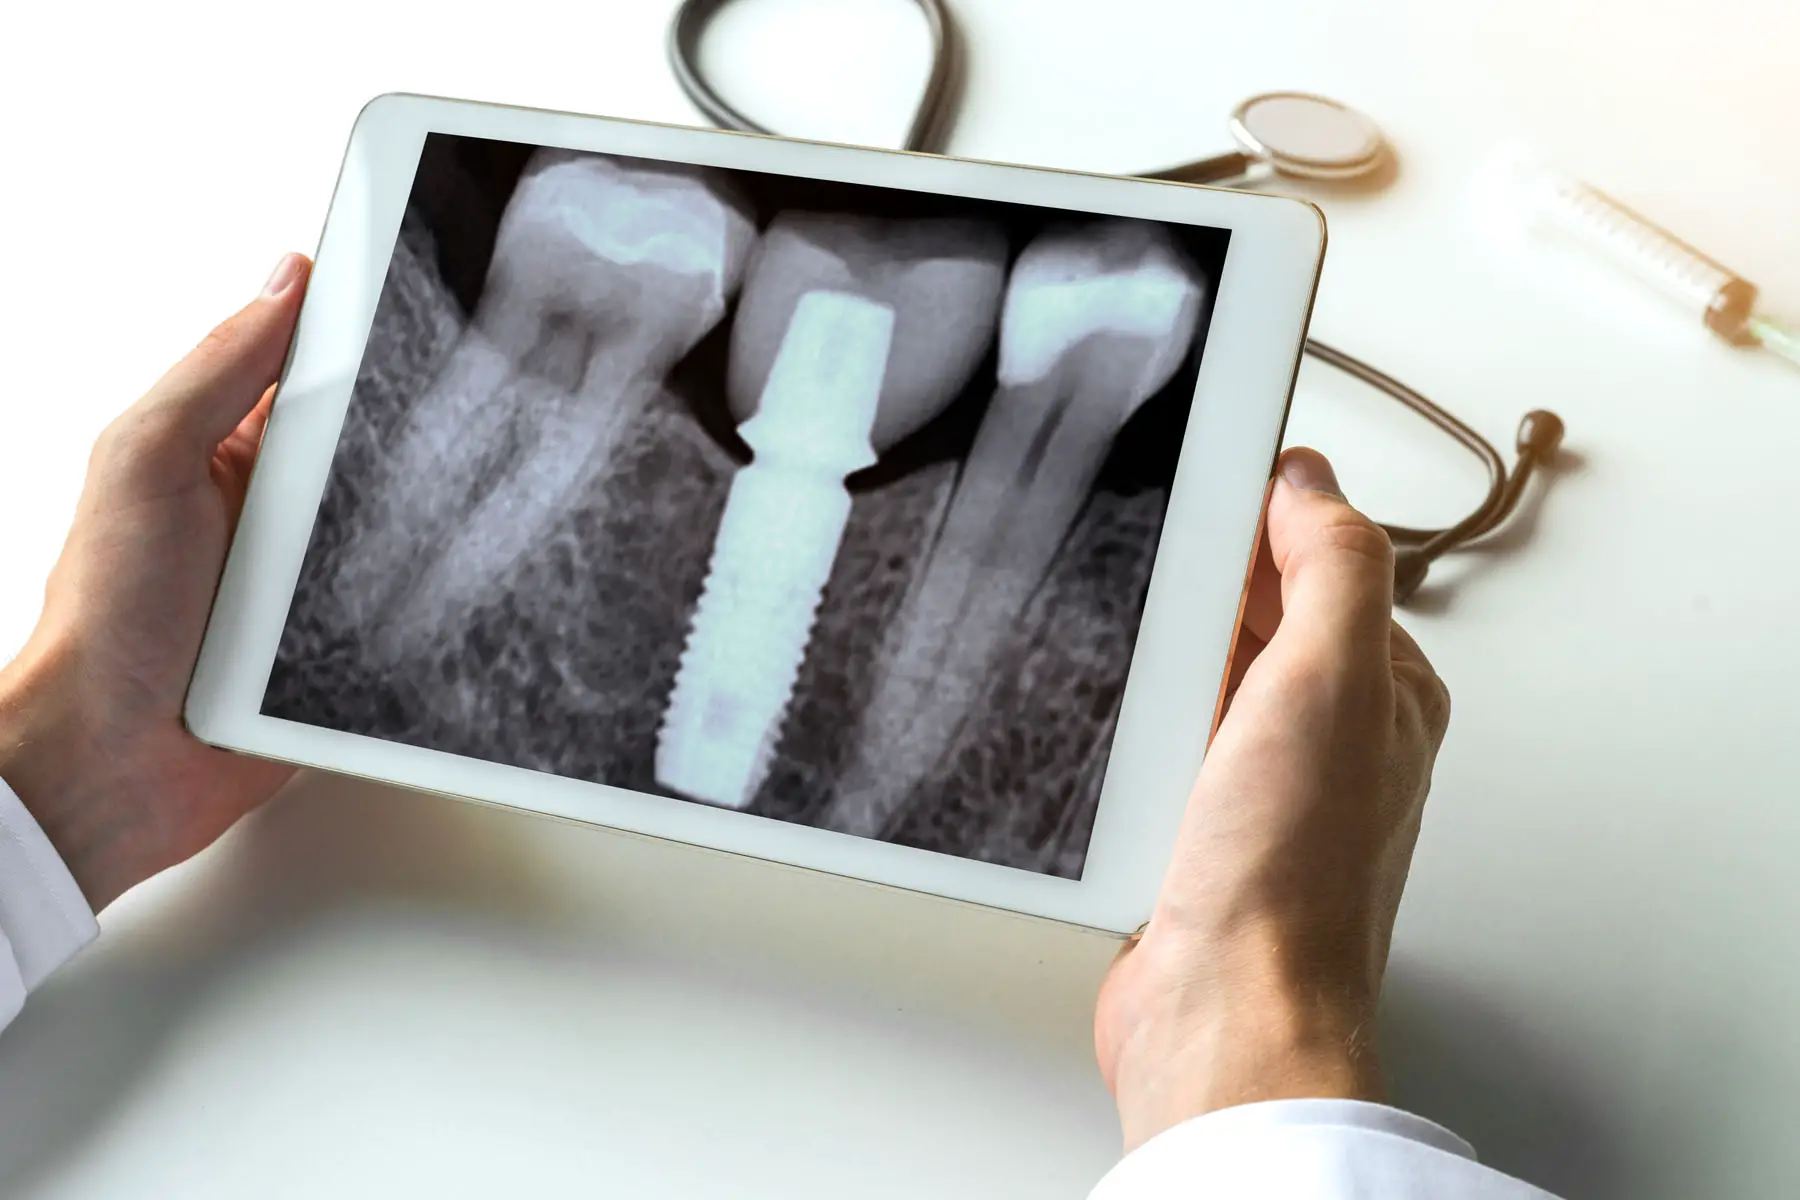 Luxembourg dentists: a dental X-ray image